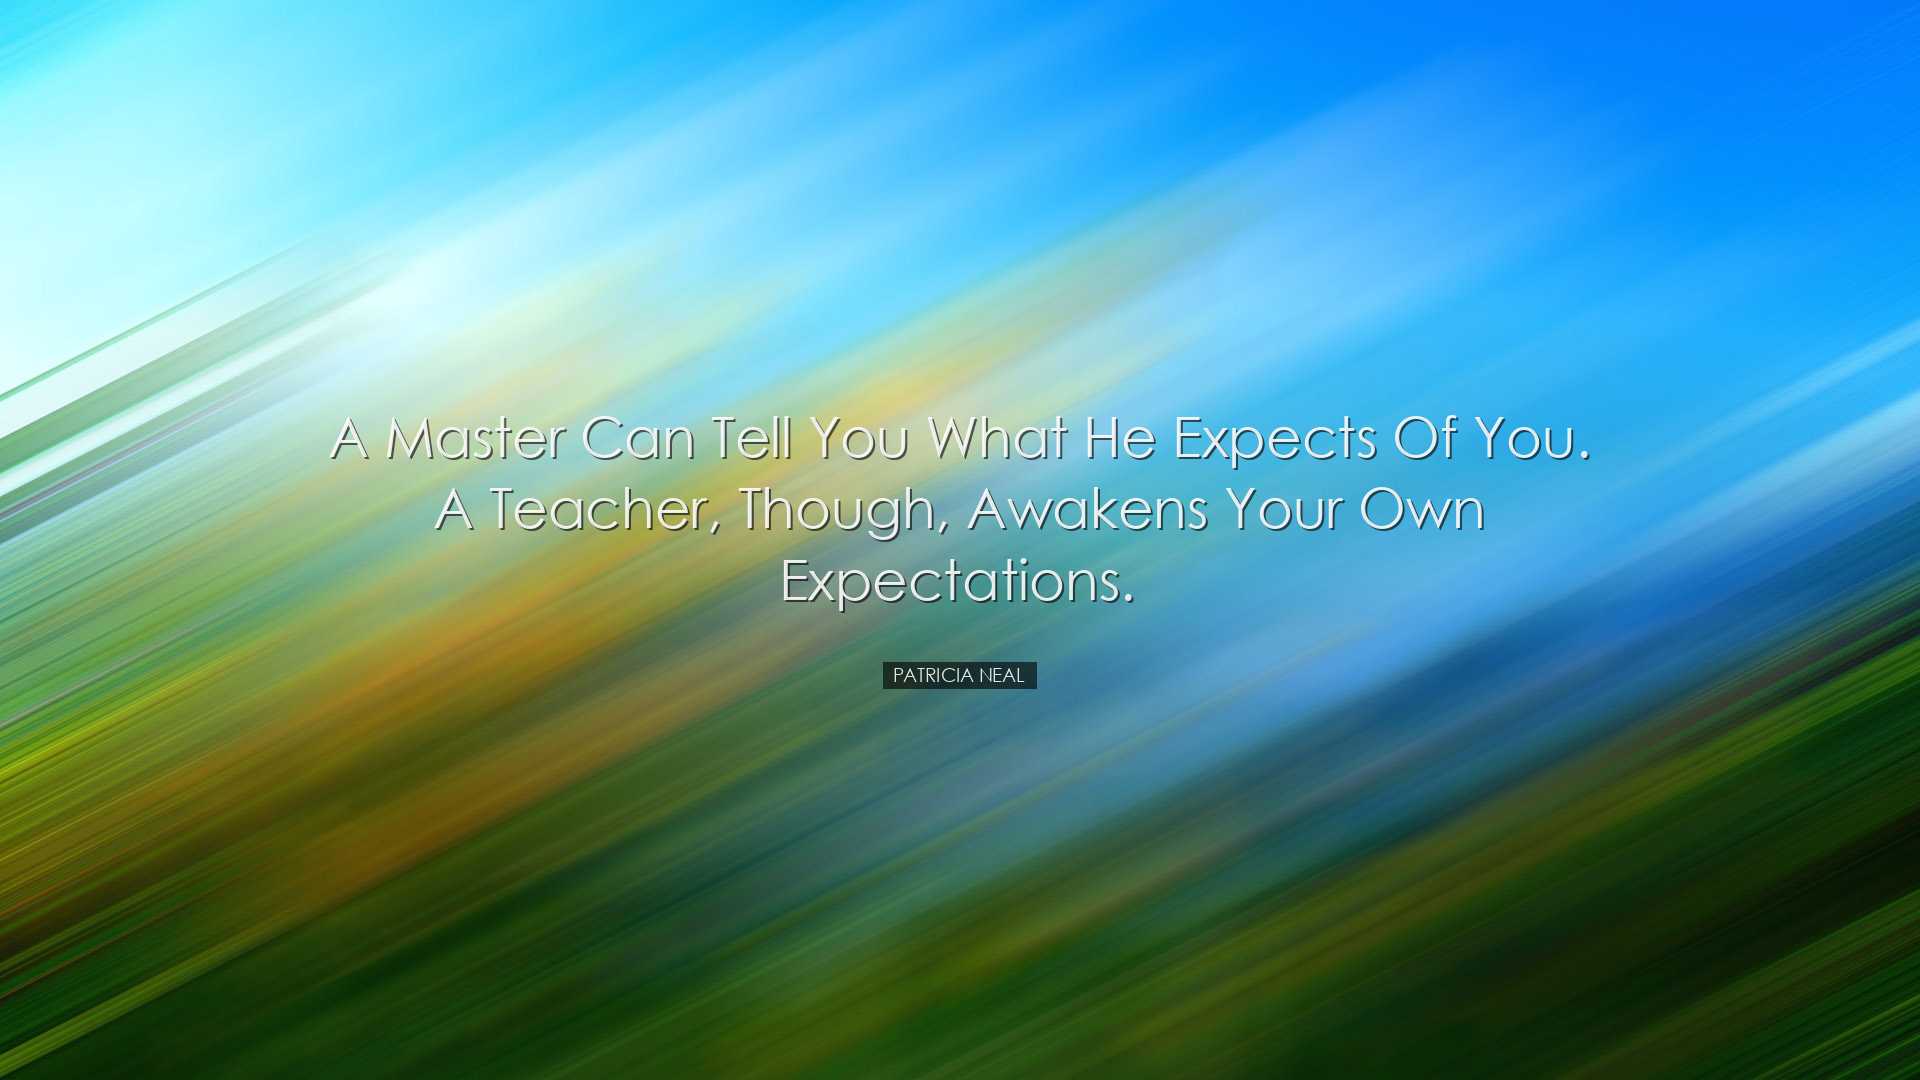 A master can tell you what he expects of you. A teacher, though, a